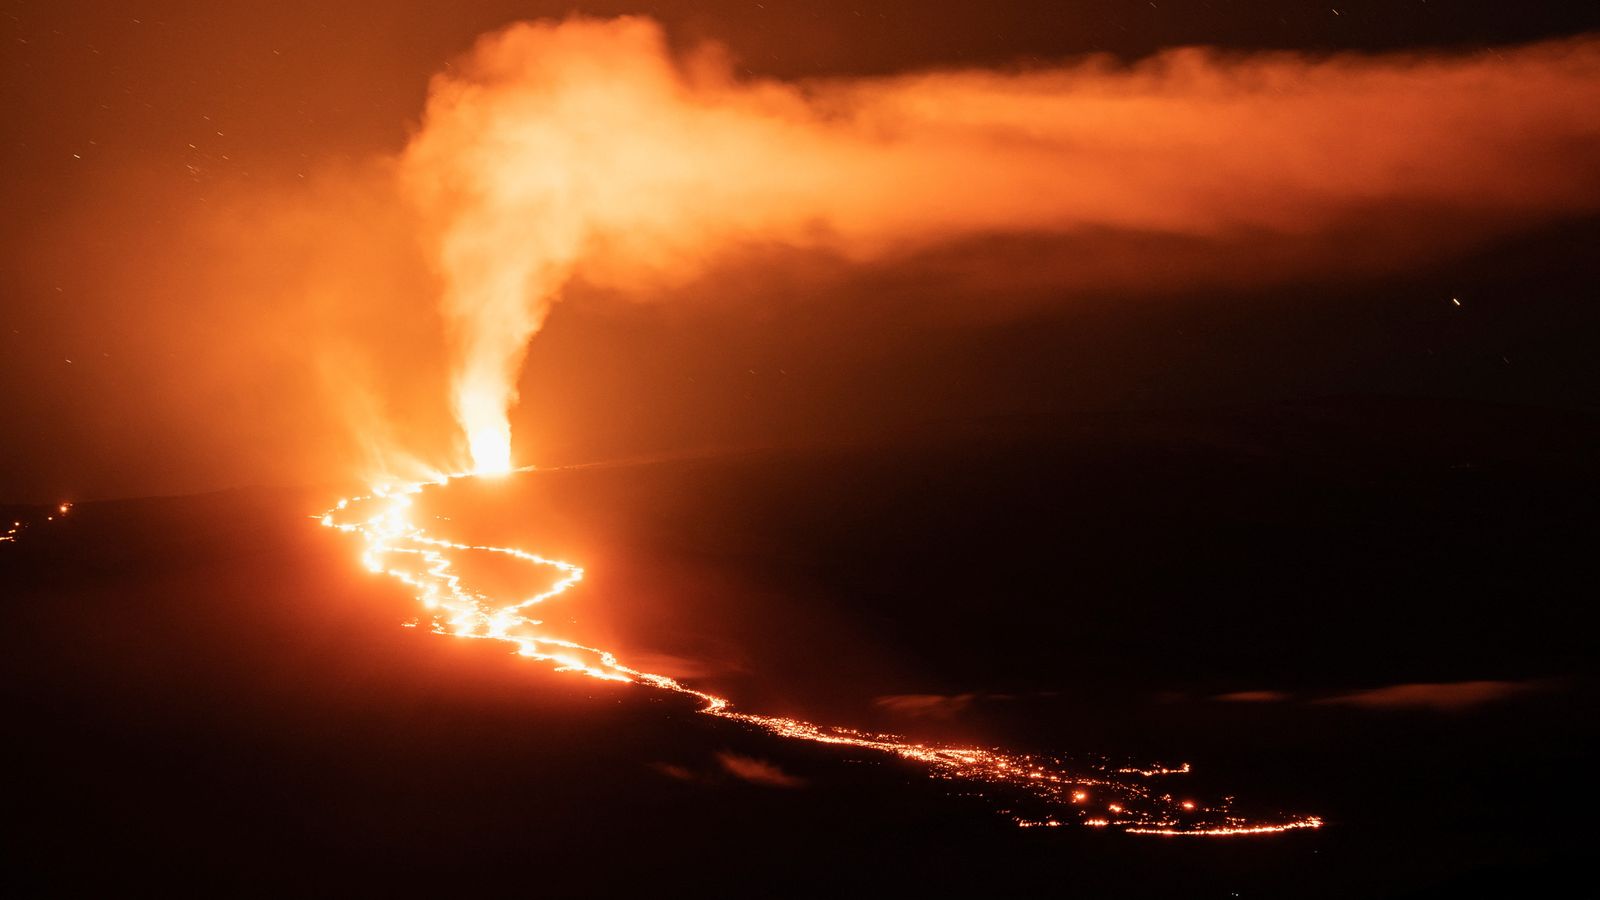 Hawaii’s Mauna Loa: Molten lava threatens to block main highway as tourists flock to catch a glimpse of volcano | World News